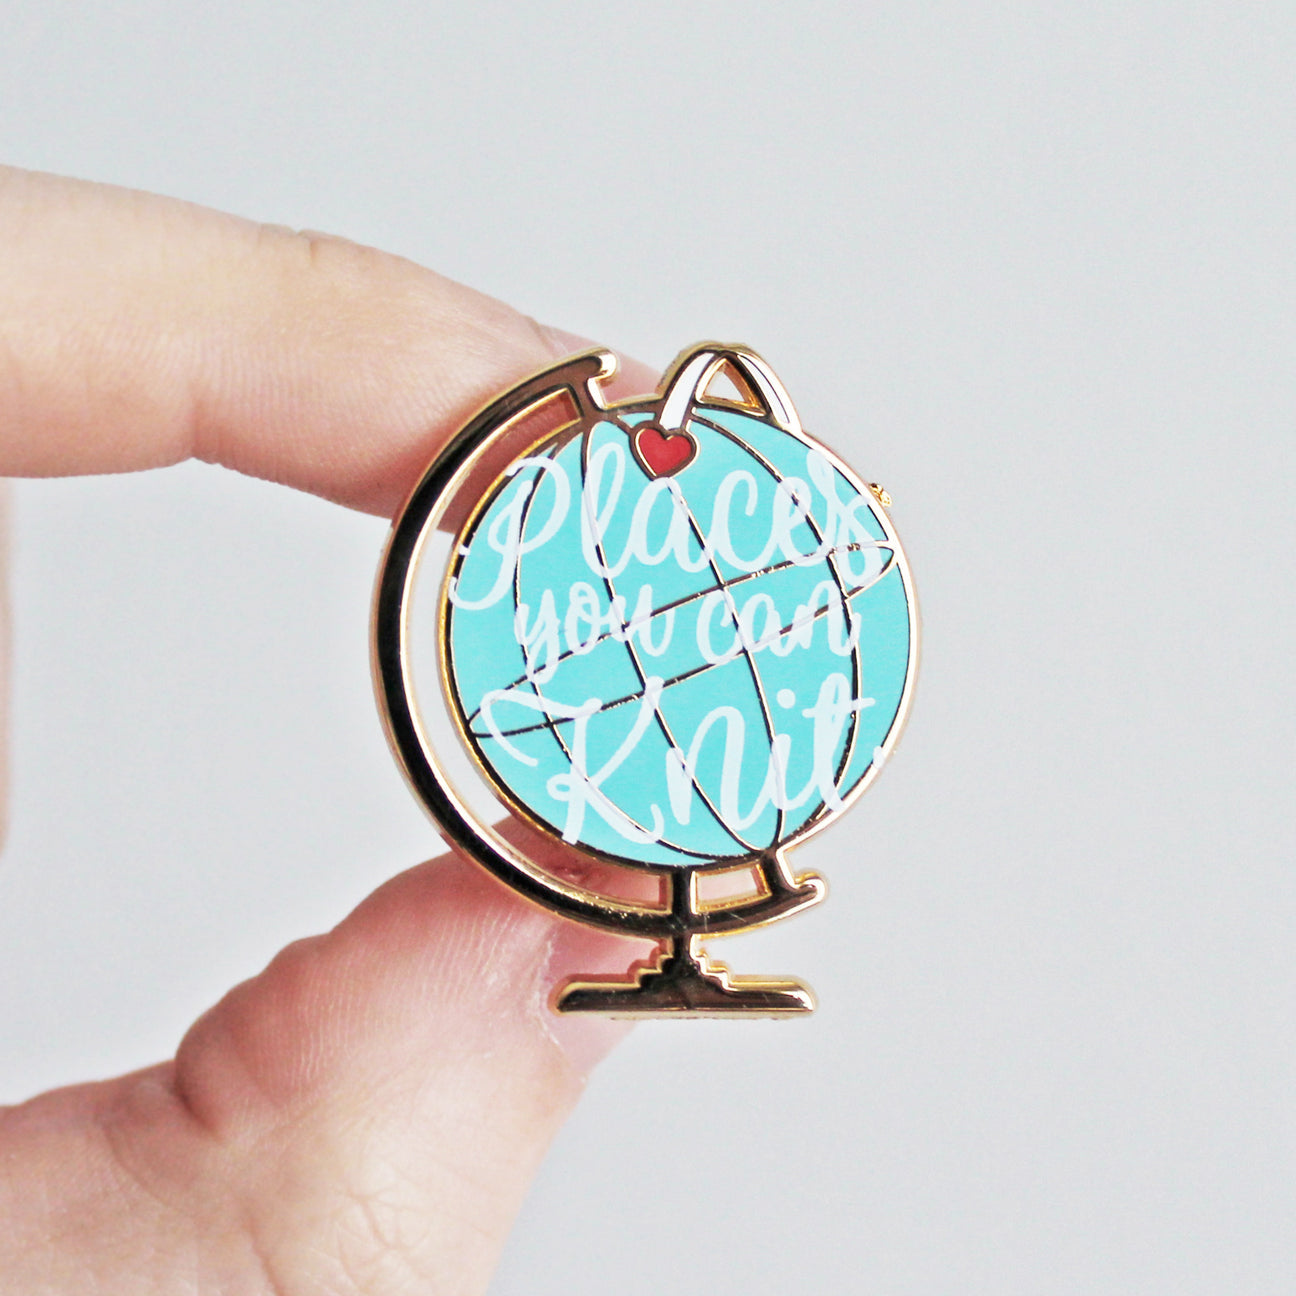 Twill and Print - Places You Can Knit Enamel Pin